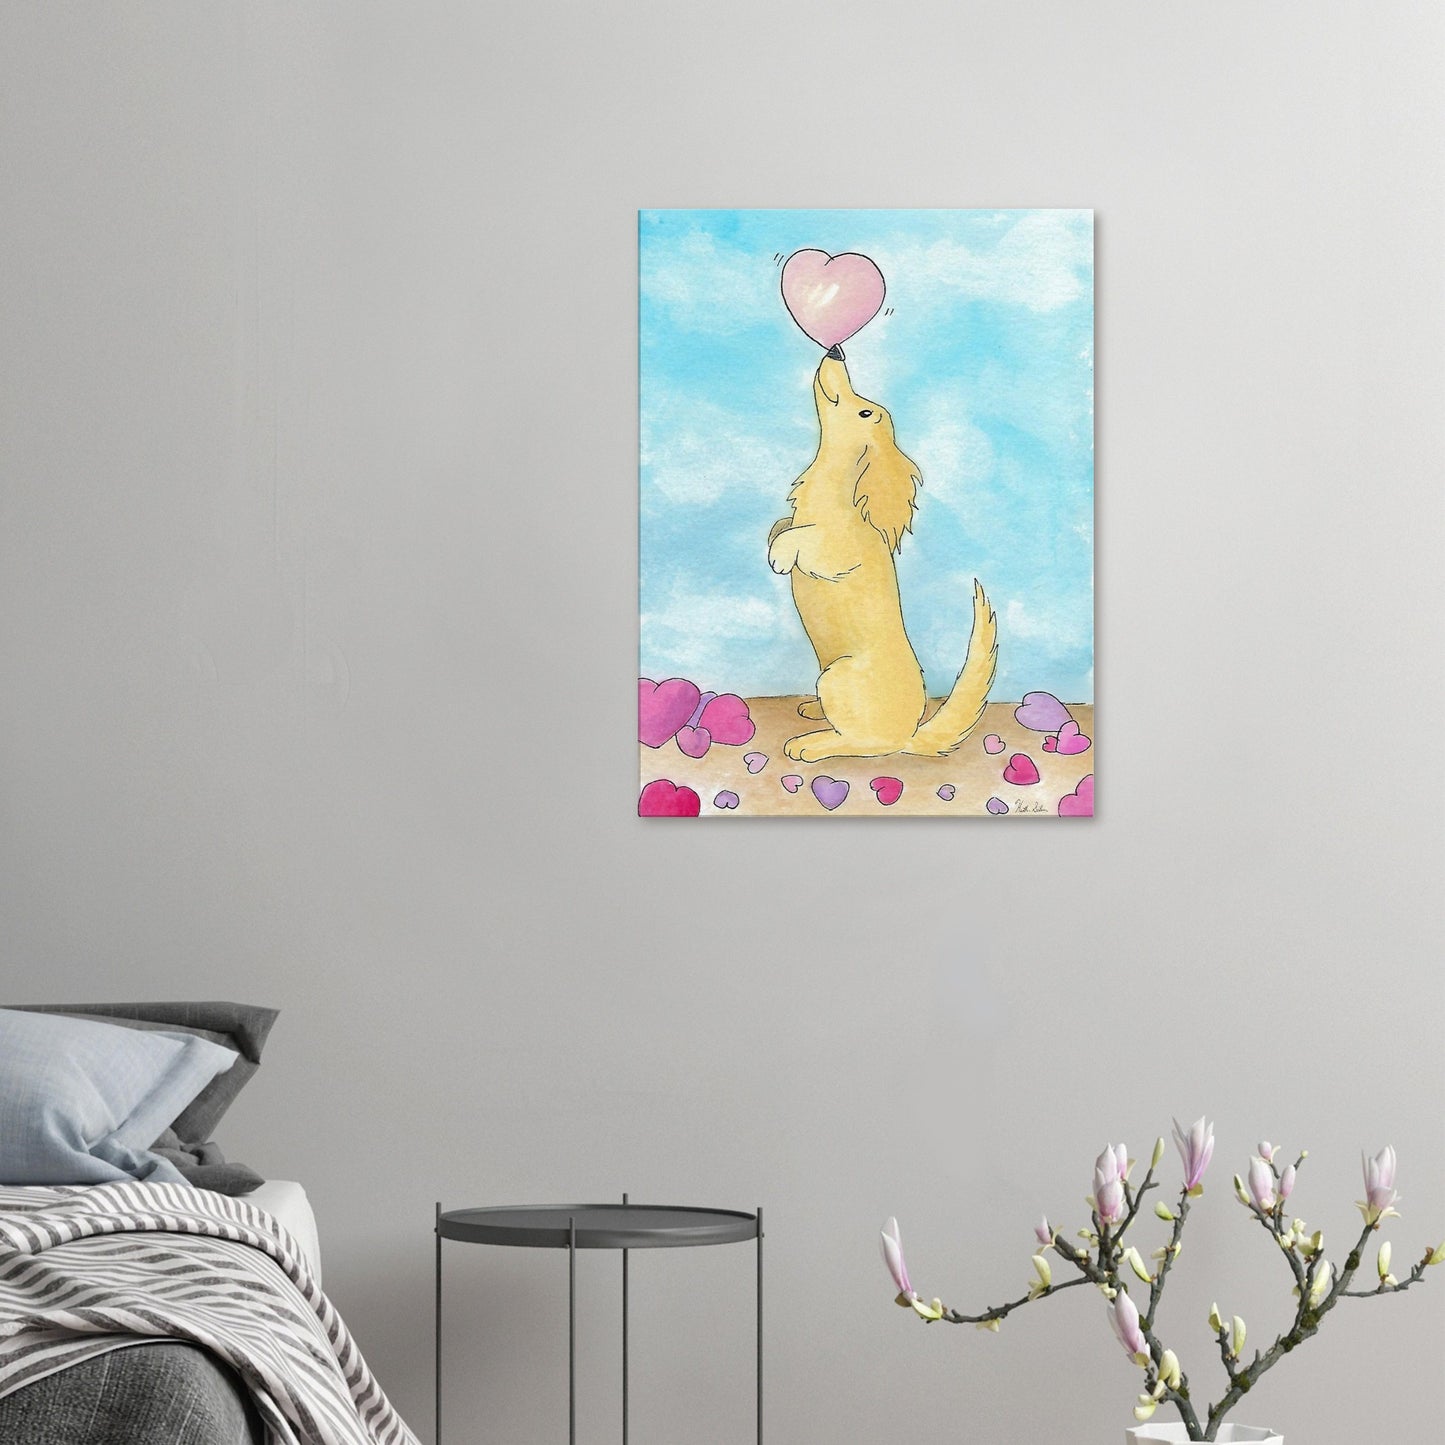 24 by 32 inch canvas wall art print of Heather Silver's watercolor painting, Puppy Love. It features a cute dog balancing a pink heart on its nose against a blue sky background. Canvas shown on wall above grey bed, grey nightstand, and blooming branch décor.